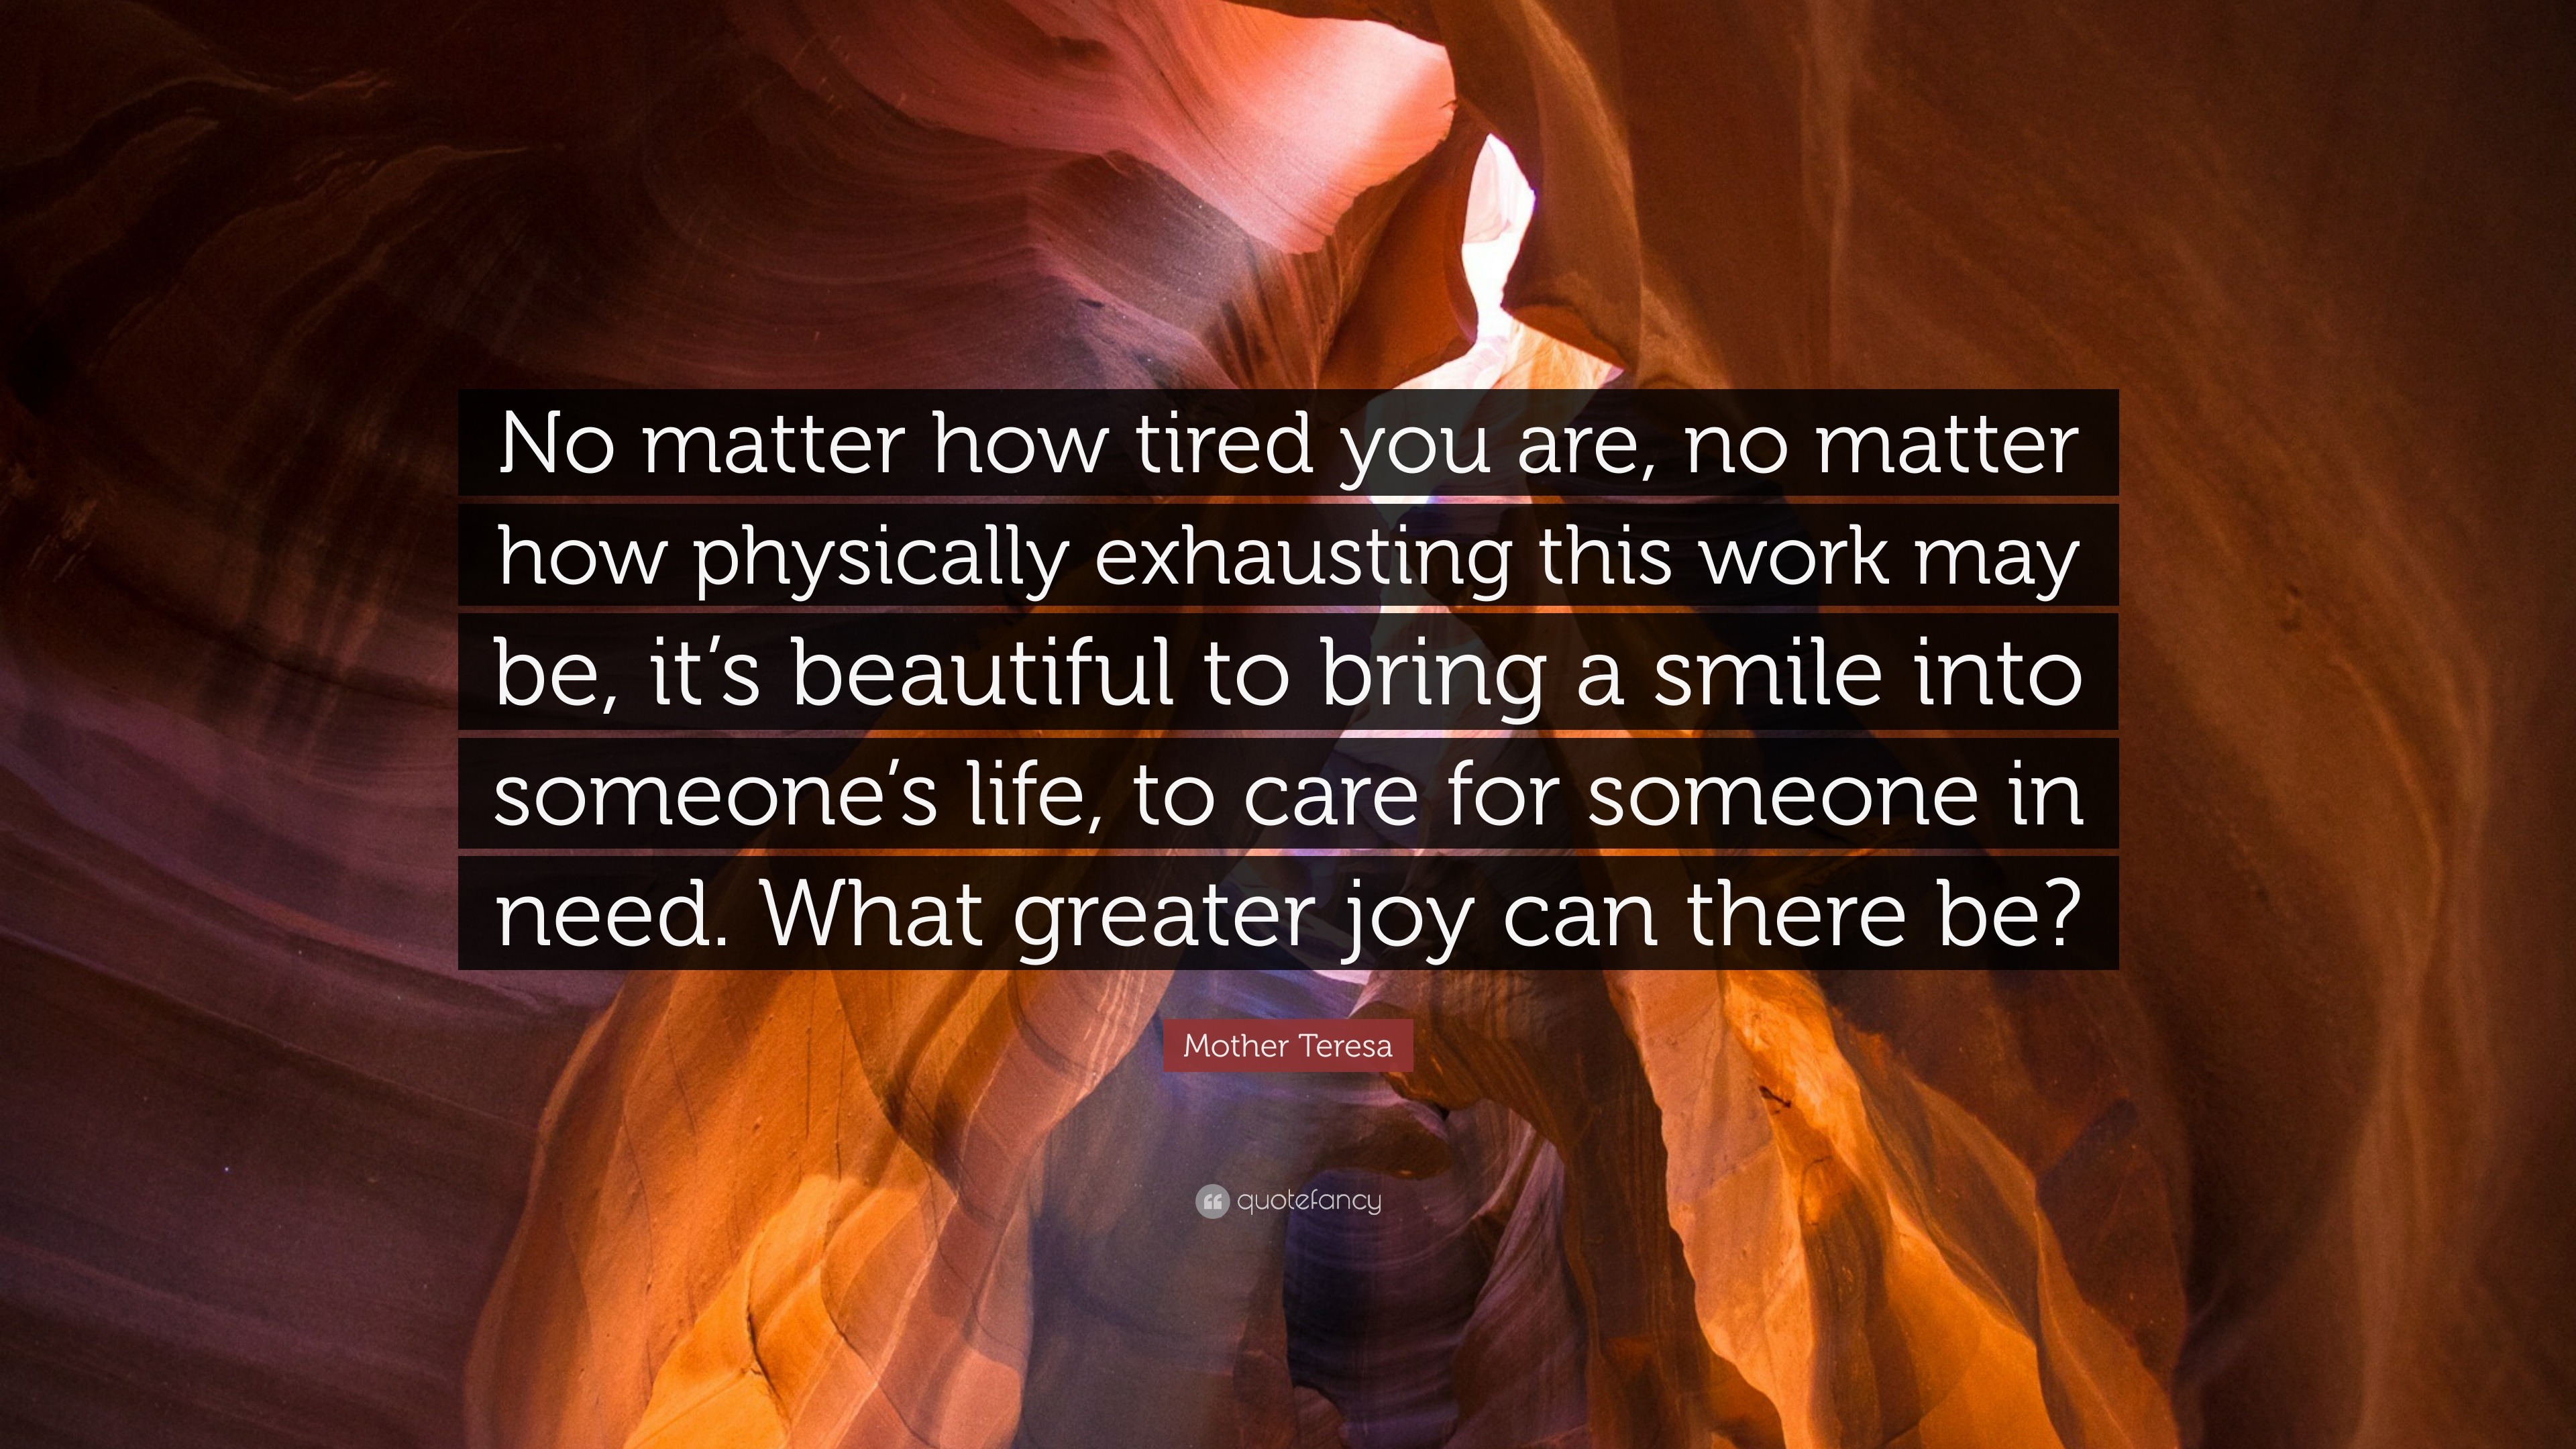 Mother Teresa Quote “No matter how tired you are no matter how physically